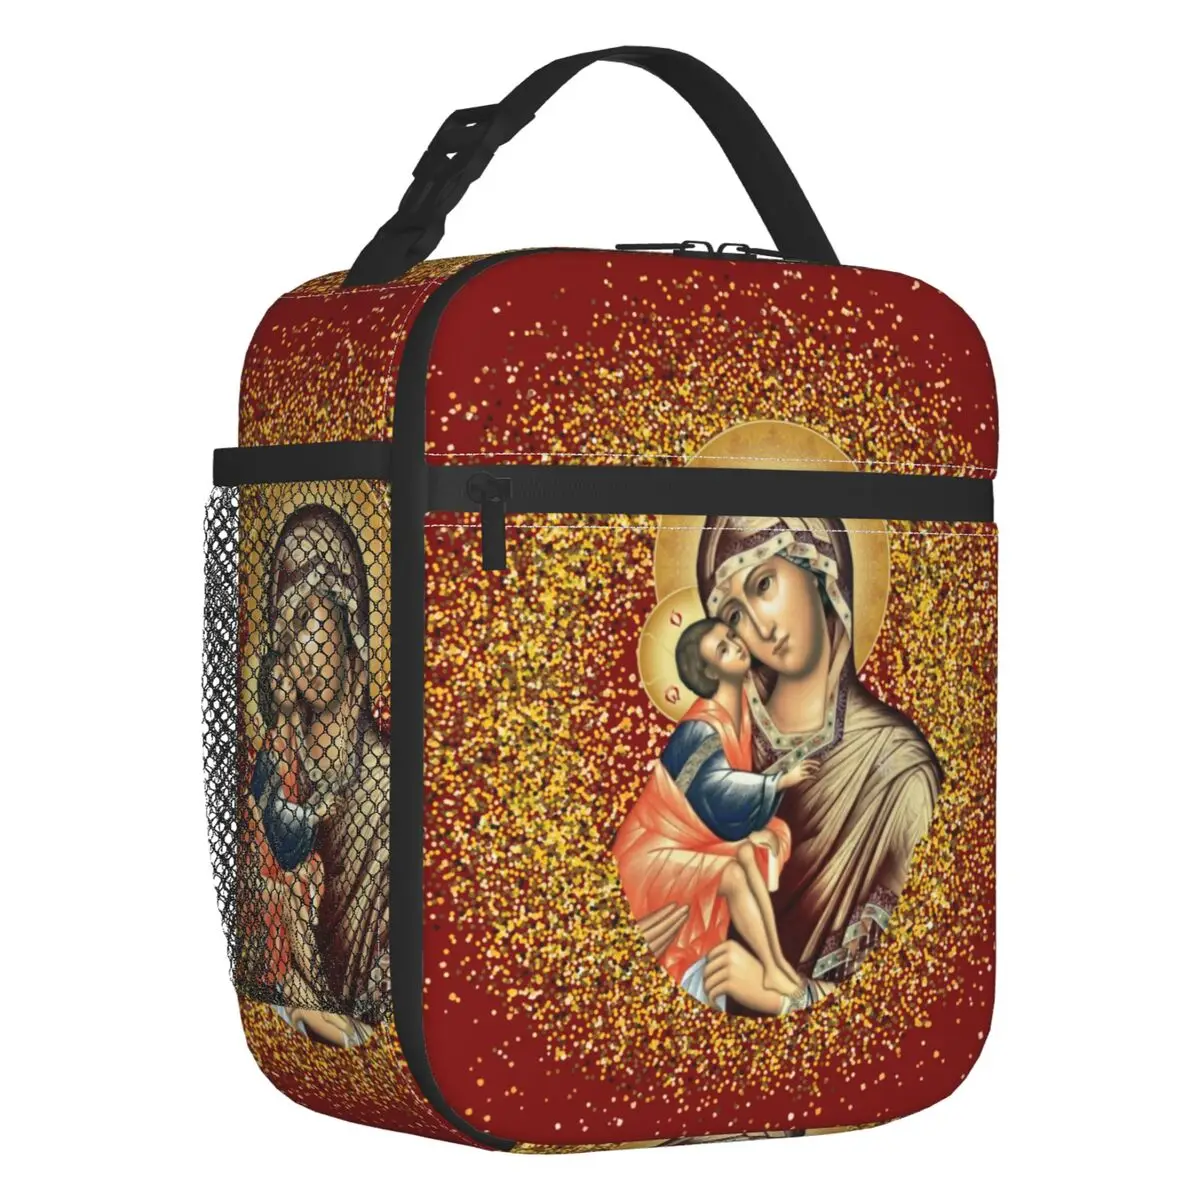 

Virgin Mary Portable Lunch Box Women Multifunction Mexican Catholic Jesus Thermal Cooler Food Insulated Lunch Bag Office Work